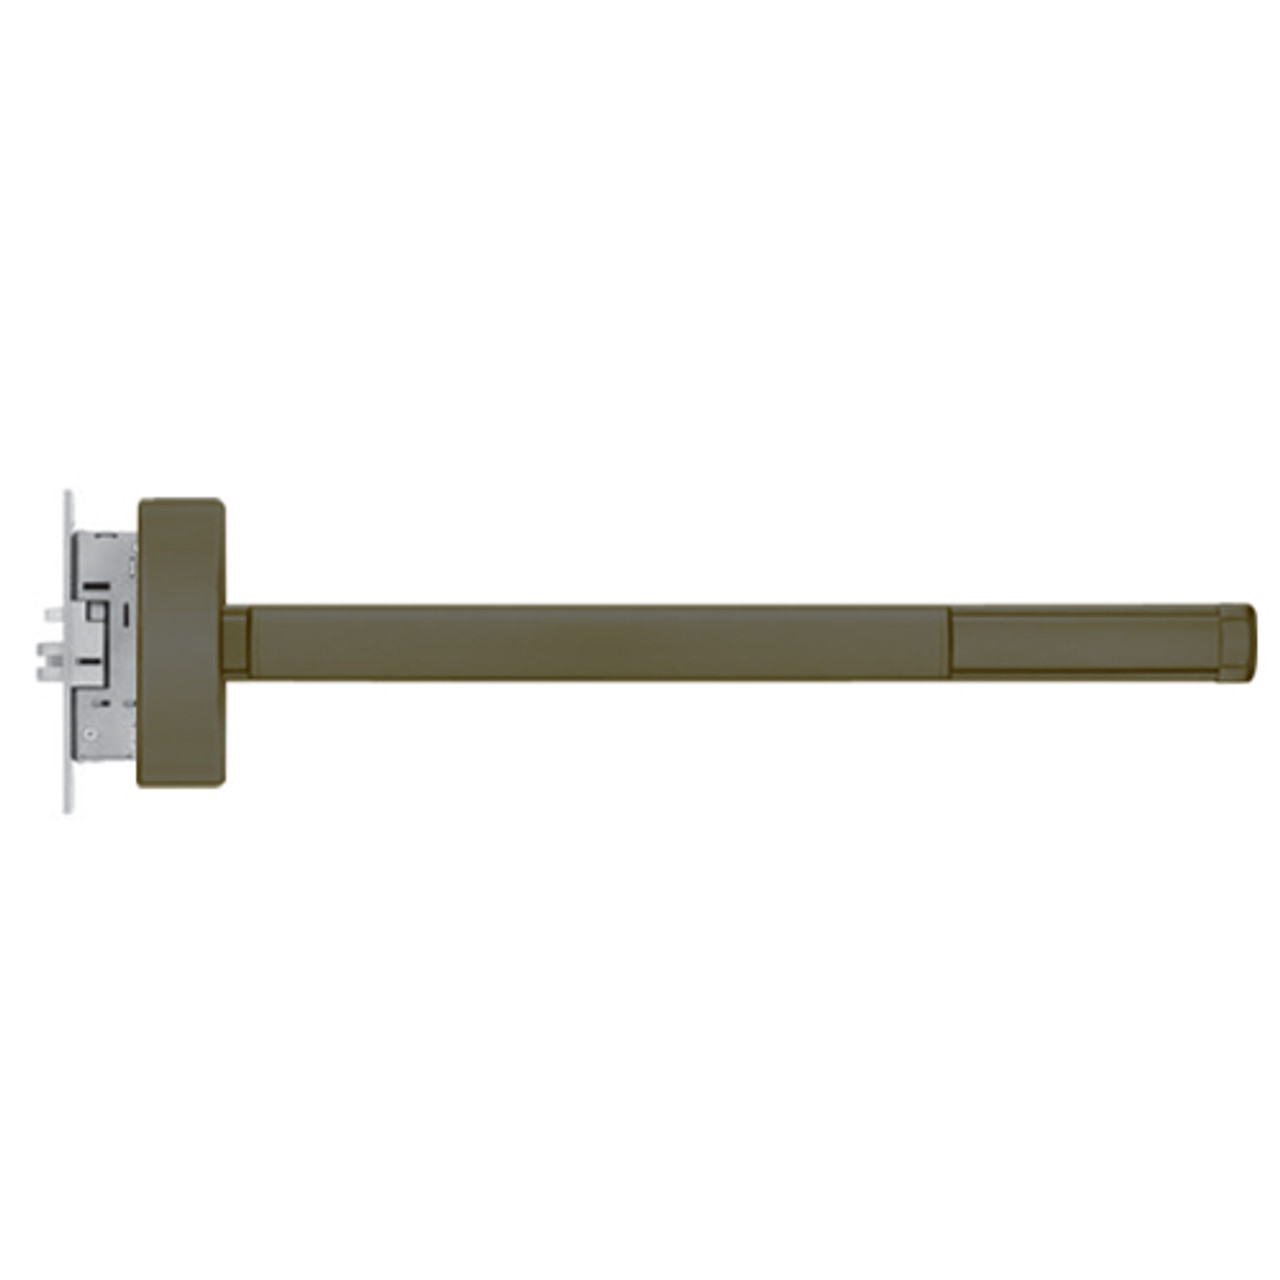 TS2303-RHR-613-36 PHI 2300 Series Apex Mortise Exit Device with Touchbar Monitoring Switch Prepped for Key Retracts Latchbolt in Oil Rubbed Bronze Finish